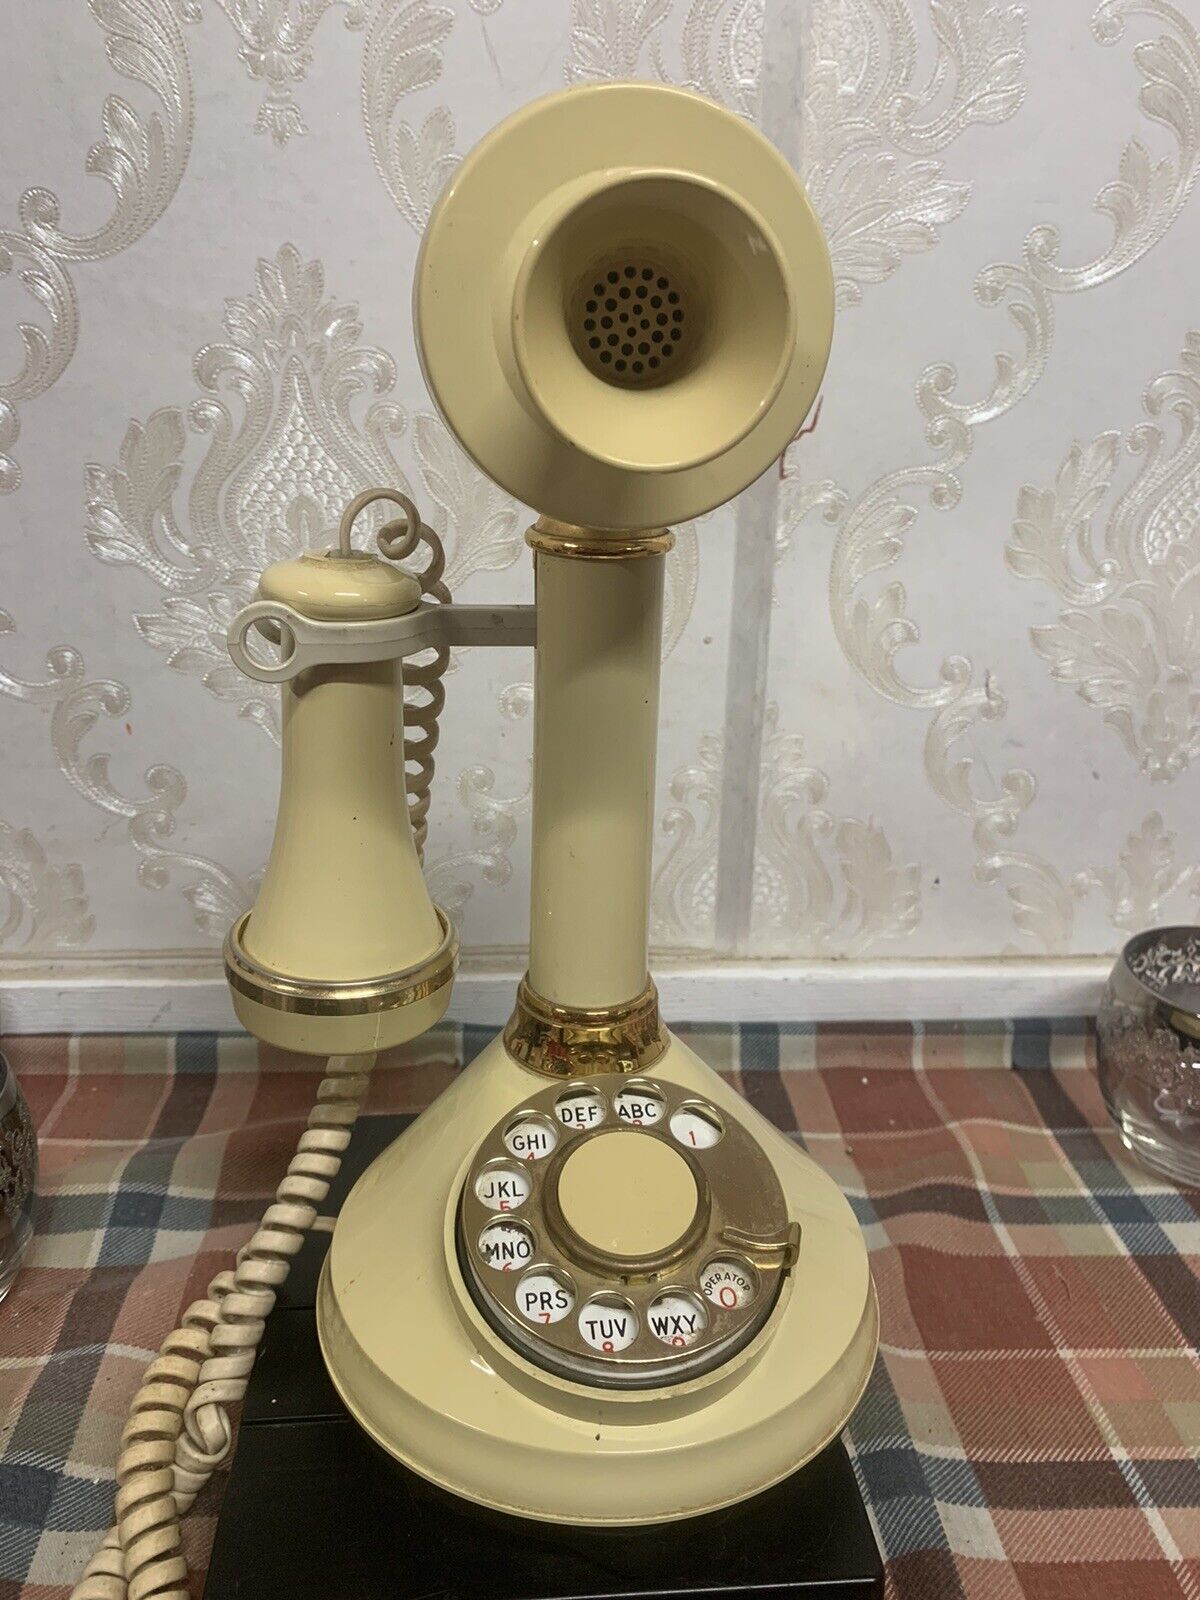 1973 Rotary Telephone By American Telecommunications Compay Candlestick Style